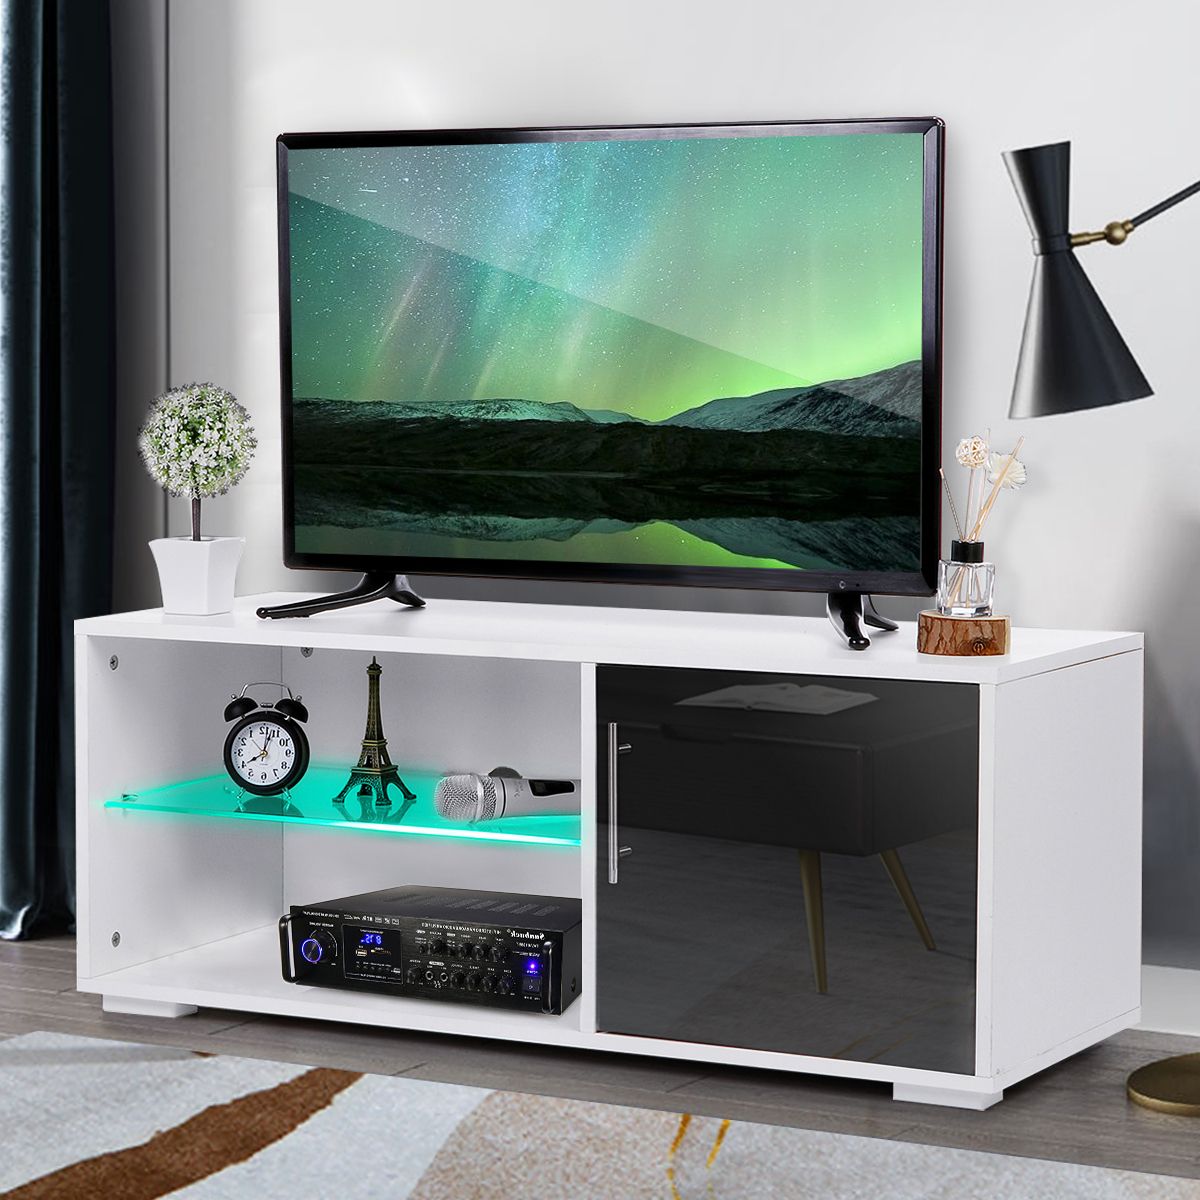 Featured Photo of 20 Best Ideas Polar Led Tv Stands